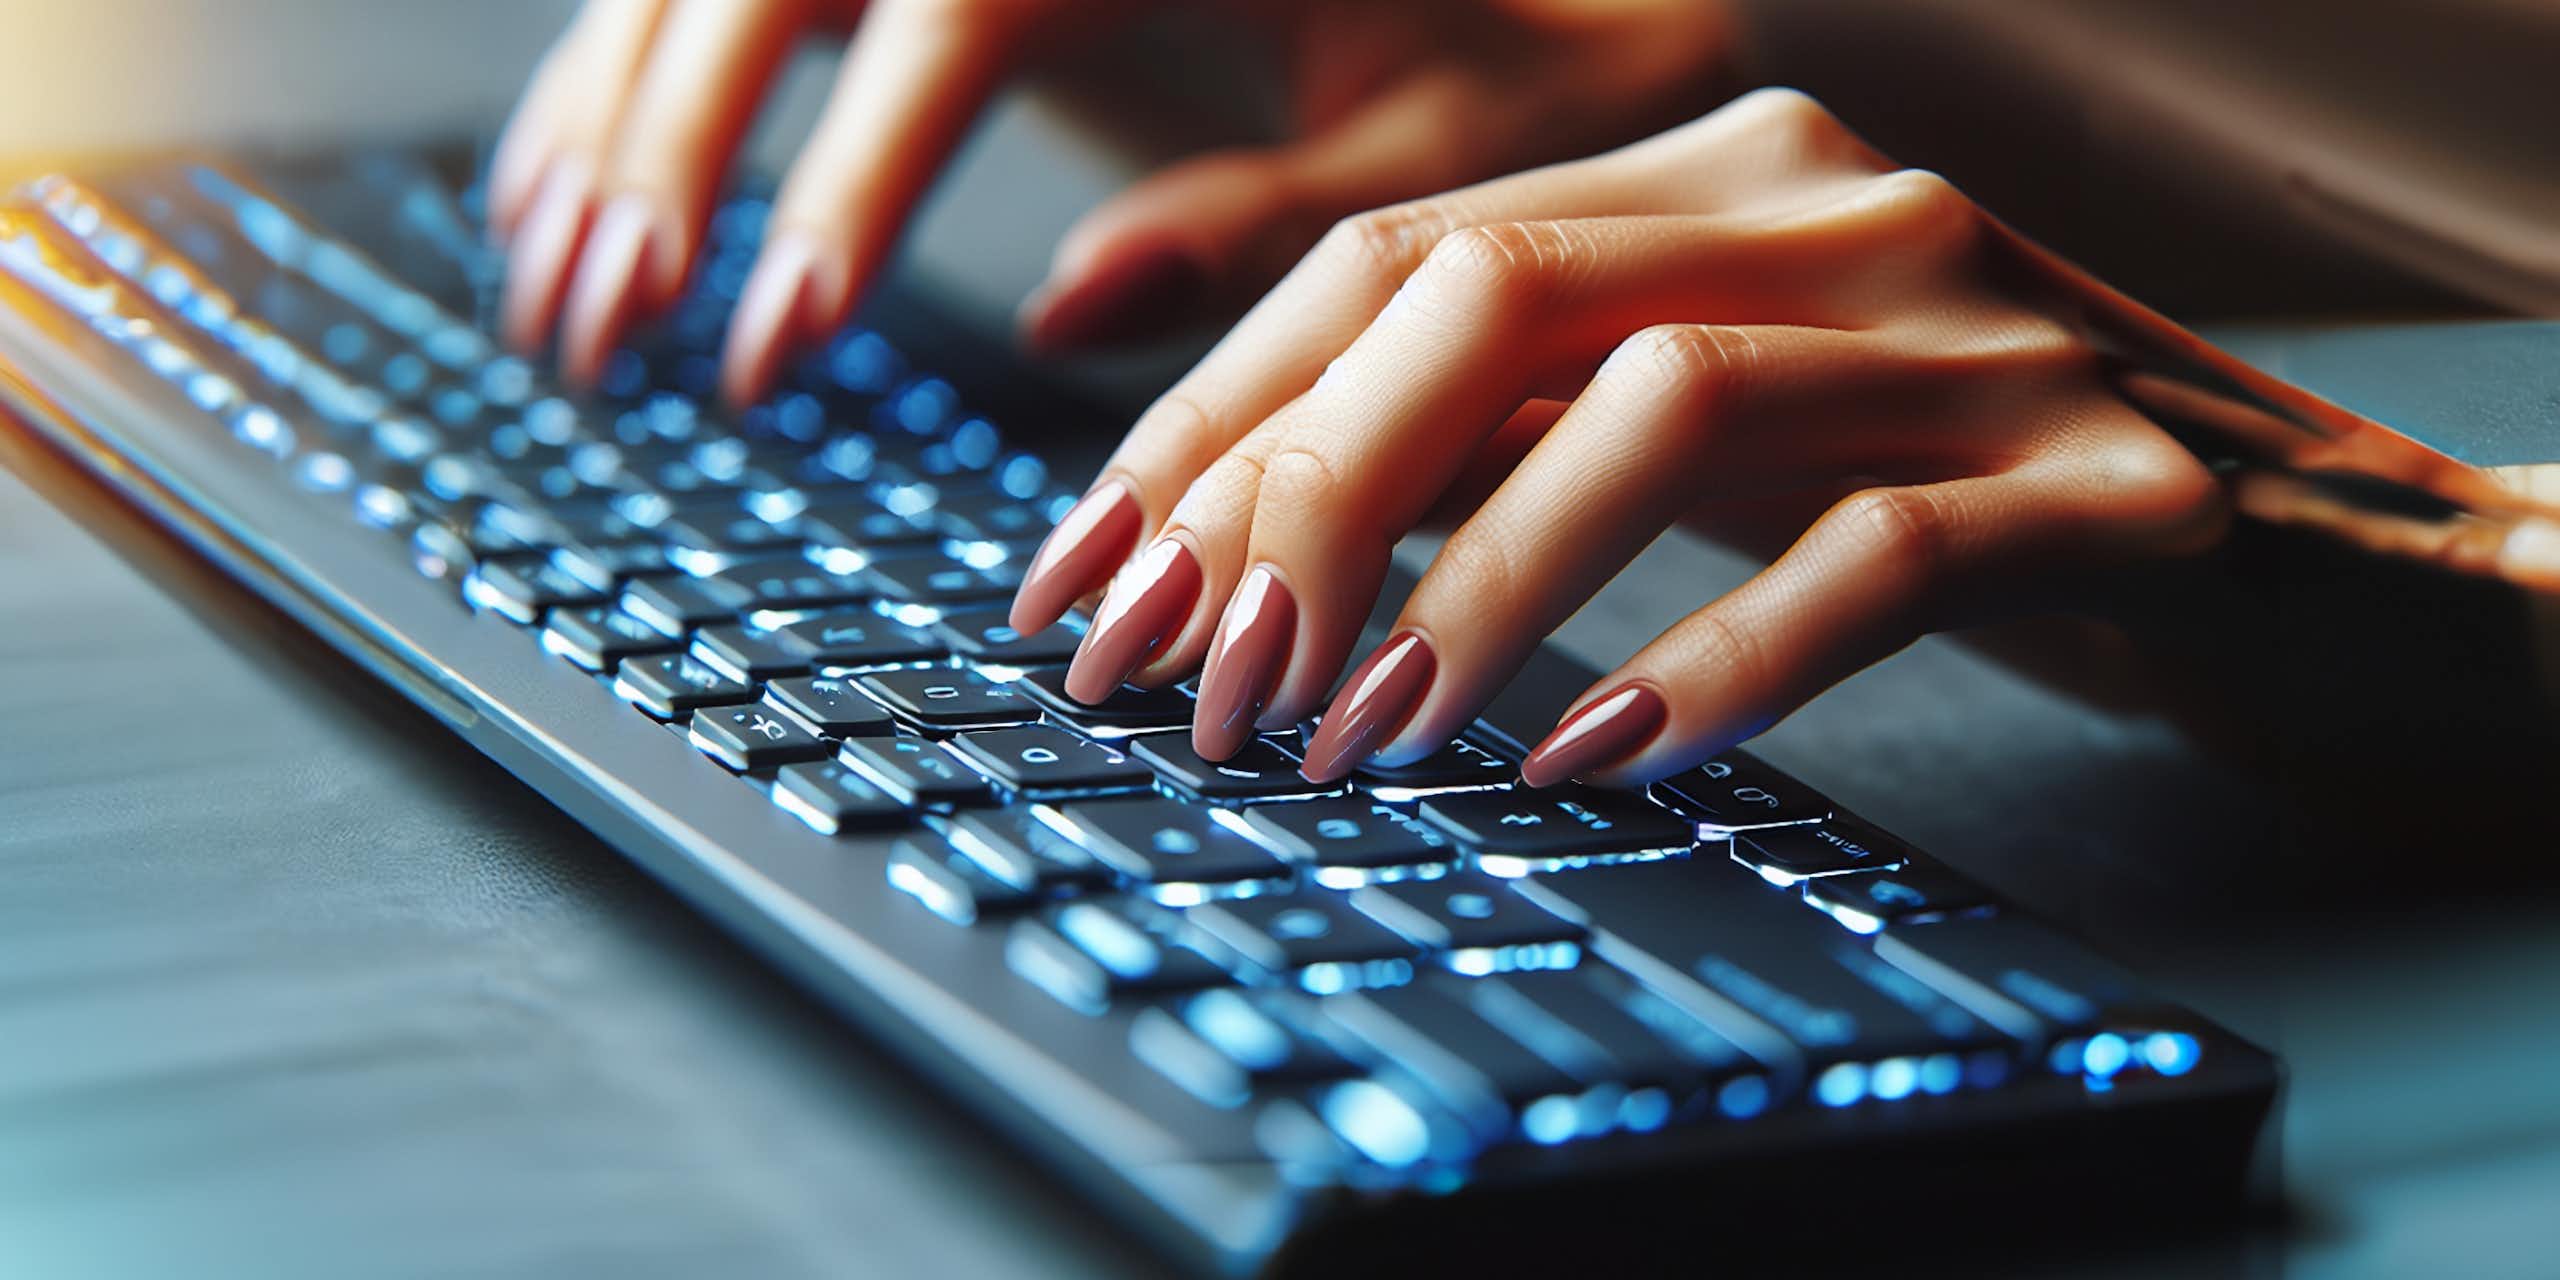 Image showing hands typing on a keyboard. The keyboard is a bit wonky and one of the hands appears to have a sixth finger.